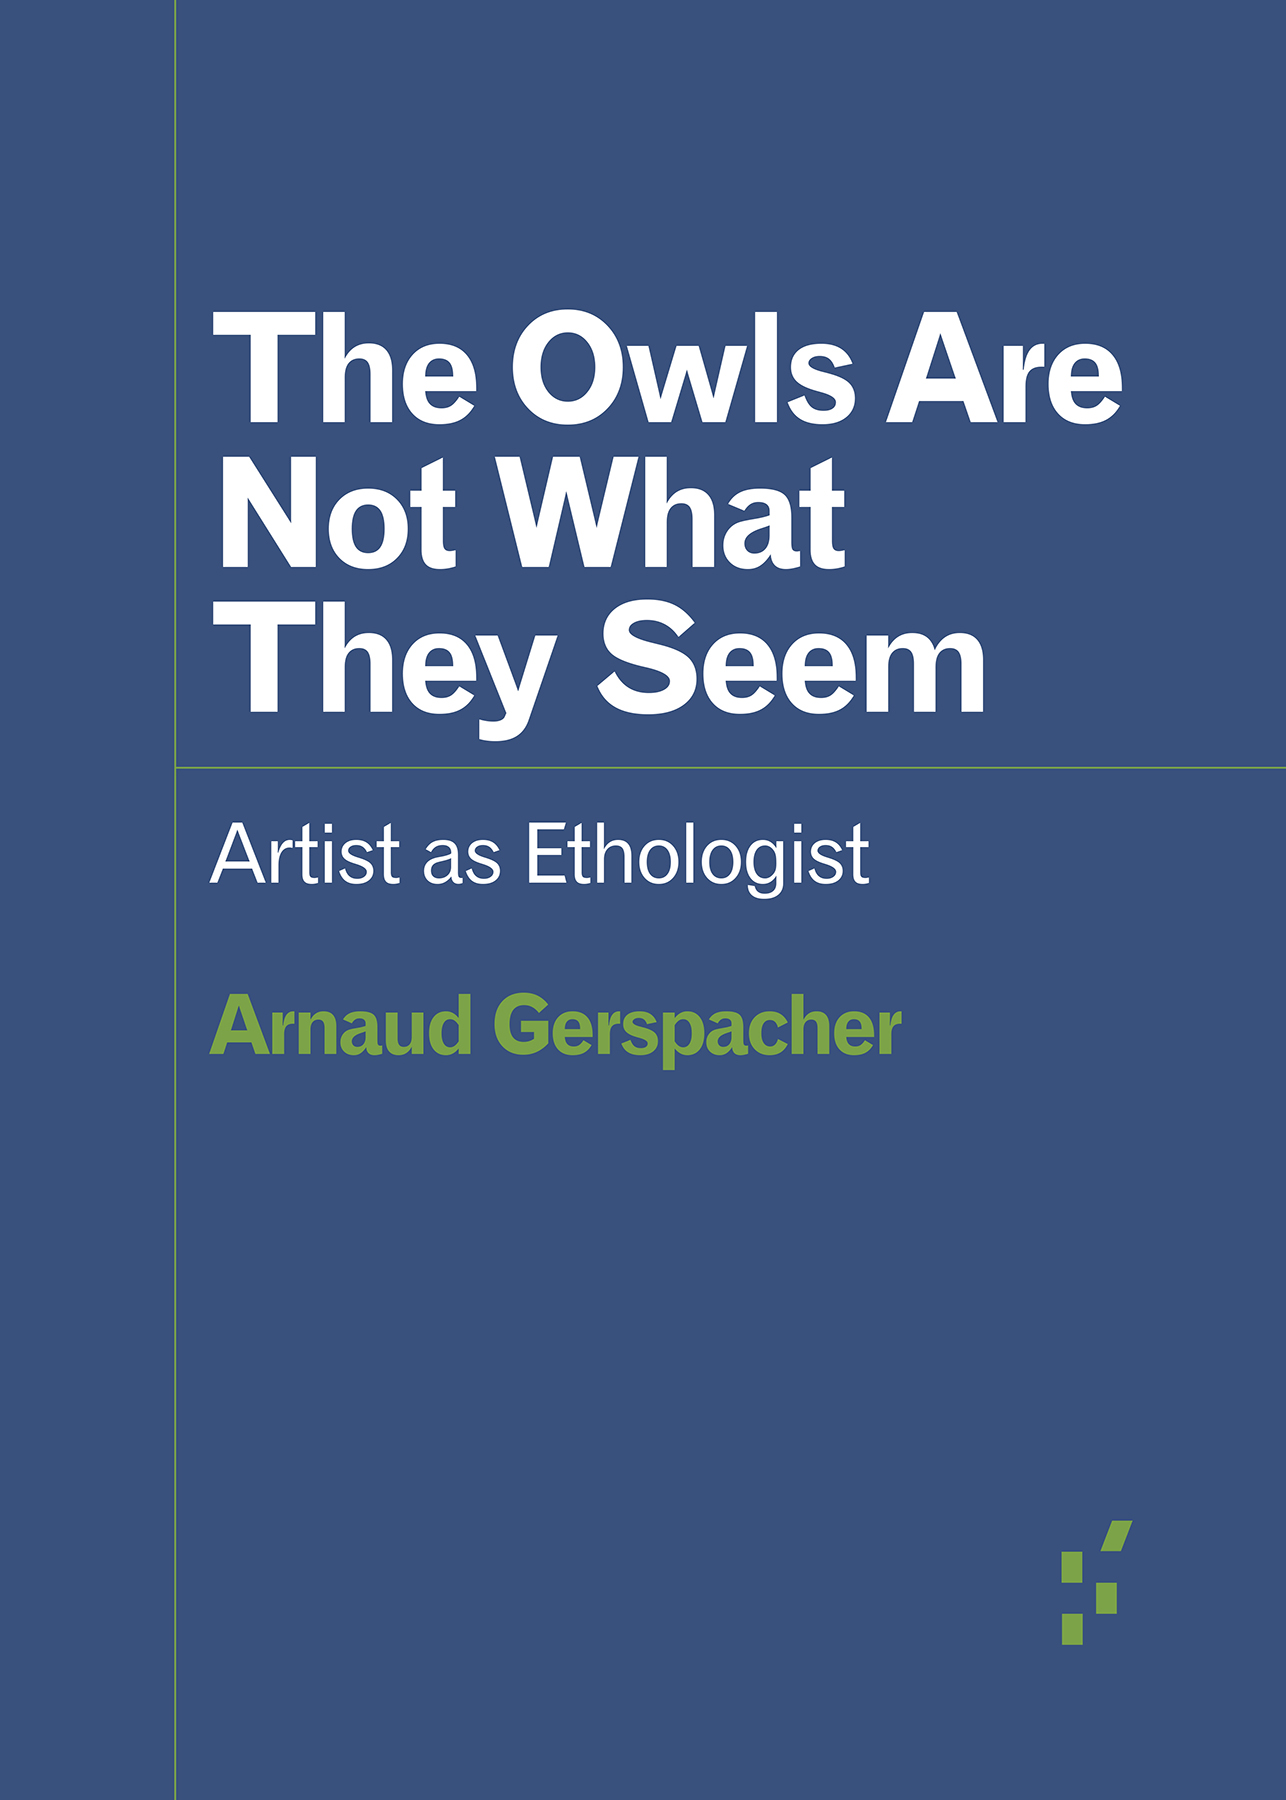 Cover for The Owls Are Not What They Seem, featuring dark blue background, white title, and lime green author name.